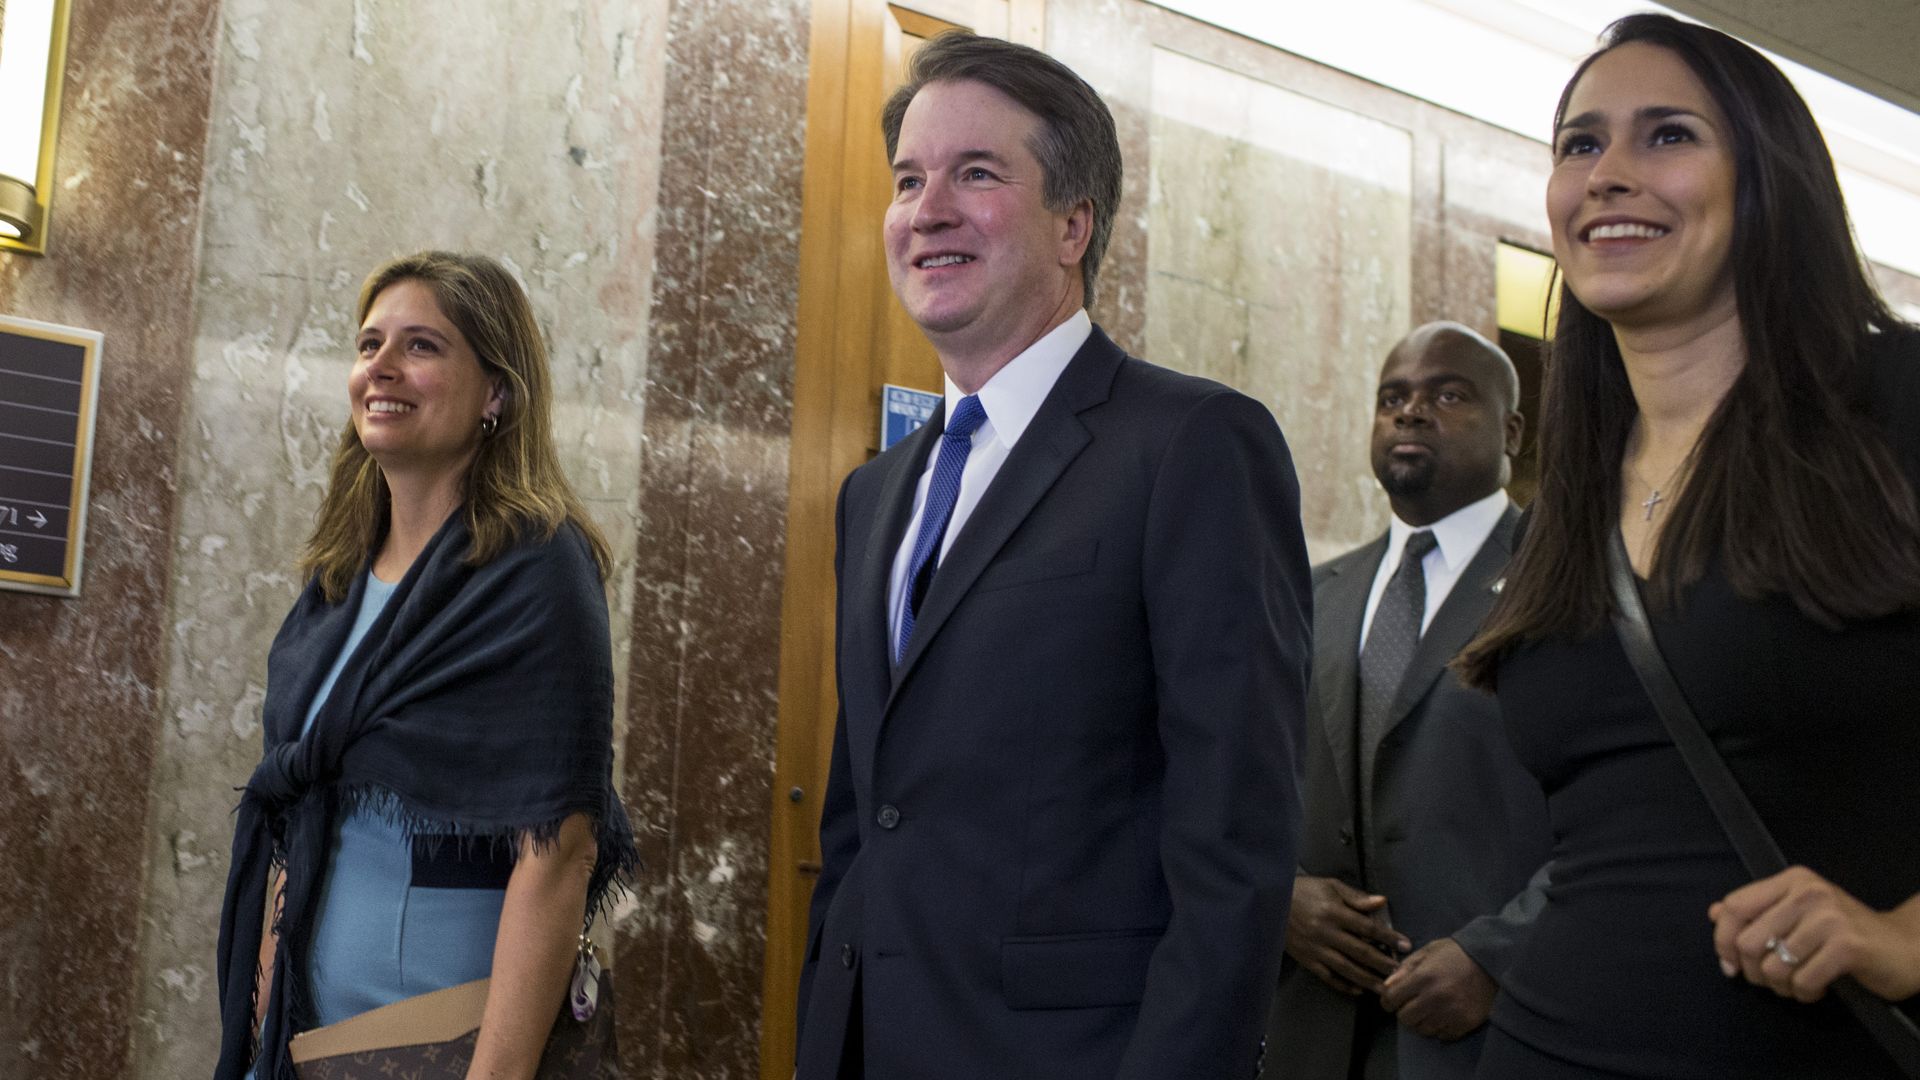 Supreme Court Nominee Brett Kavanaugh on Capitol Hill. Photo: Zach Gibson/Getty Images